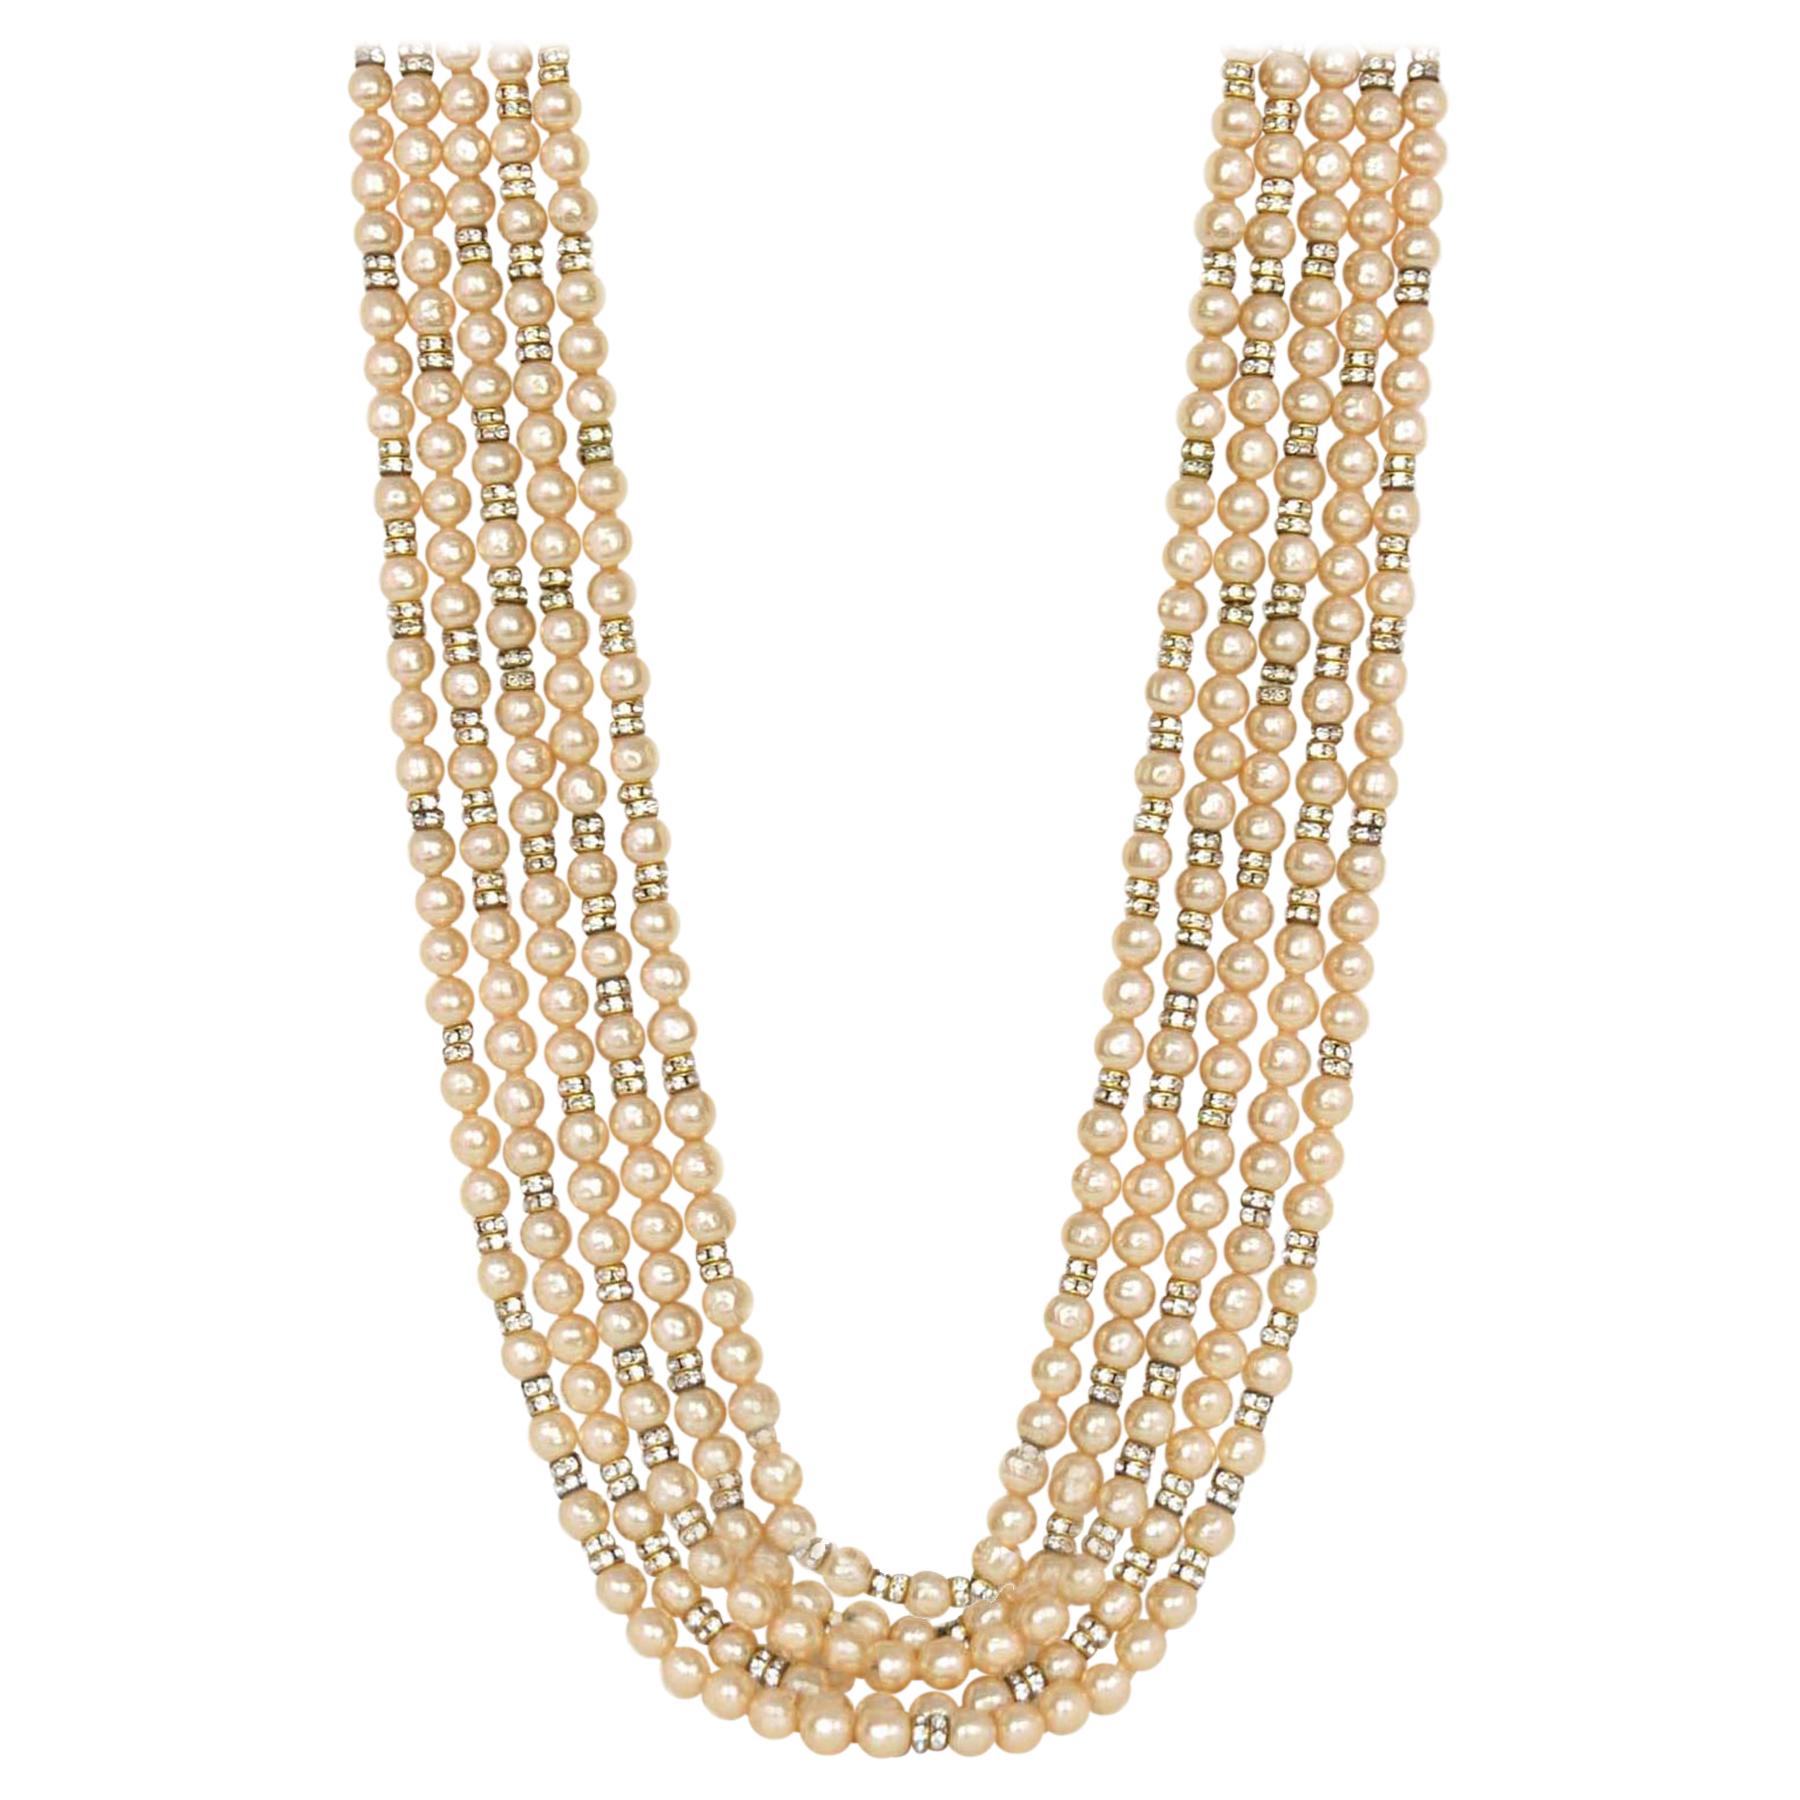 Chanel Vintage 1990s Multi-Strand Faux Pearl & Crystal Rondelle Necklace